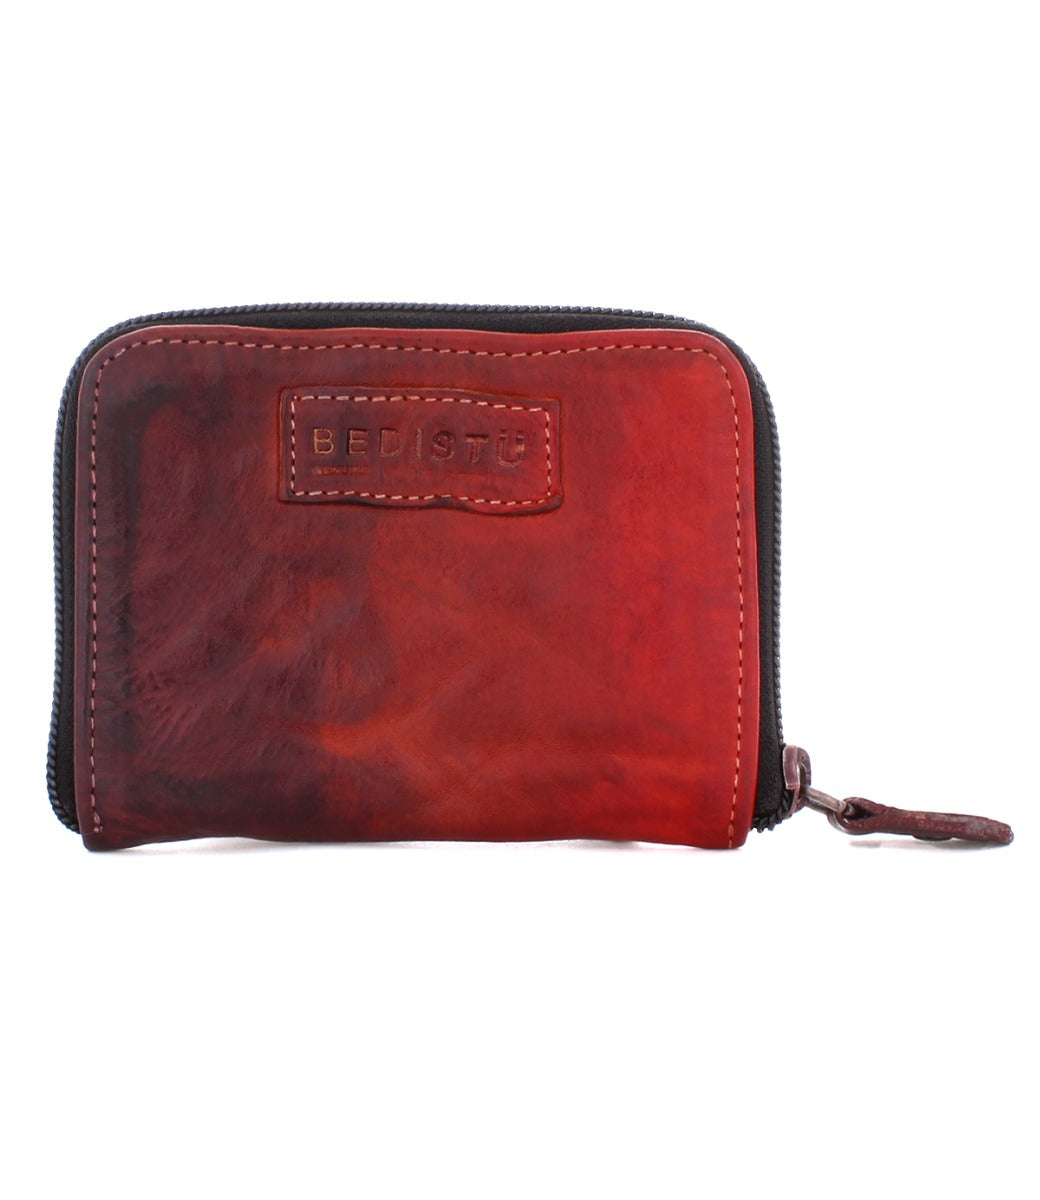 An Ozzie by Bed Stu red leather wallet on a white background.